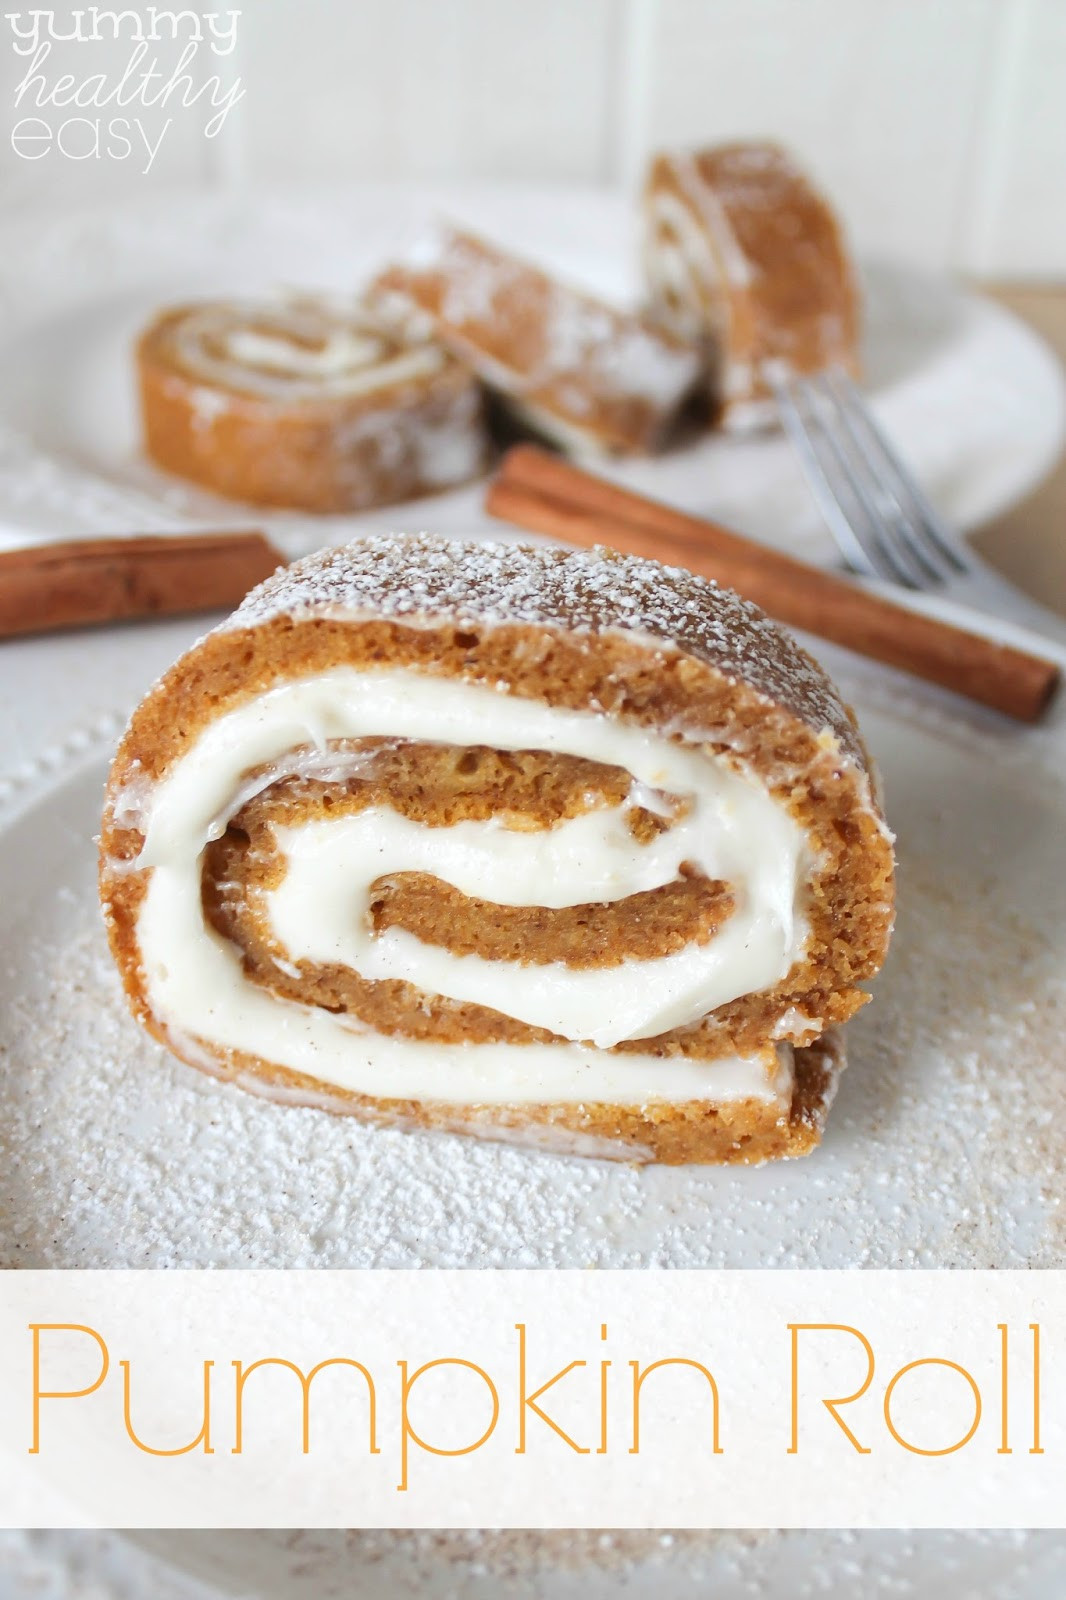 Quick And Easy Fall Desserts
 Easy Pumpkin Roll Dessert Yummy Healthy Easy